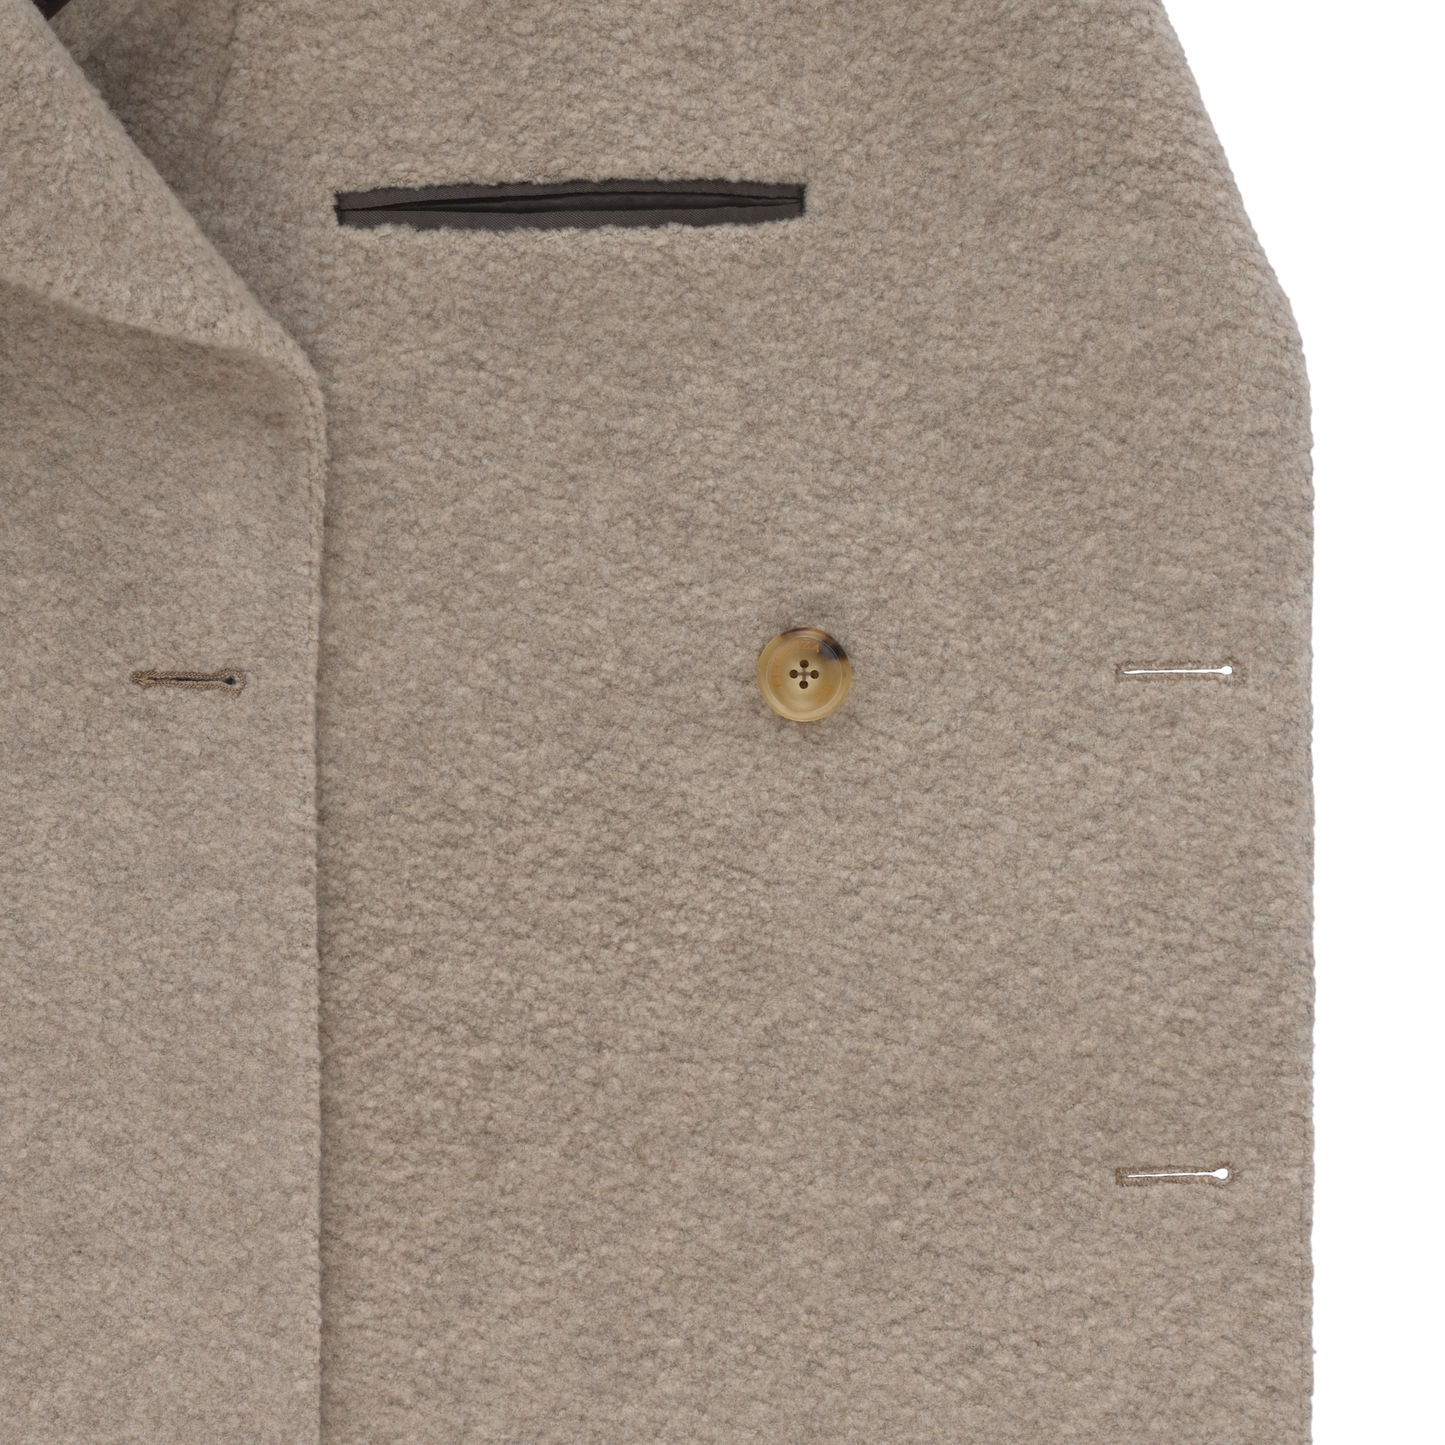 Piacenza Cashmere Double-Breasted Virgin Wool and Cashmere-Blend Coat in  Ivory